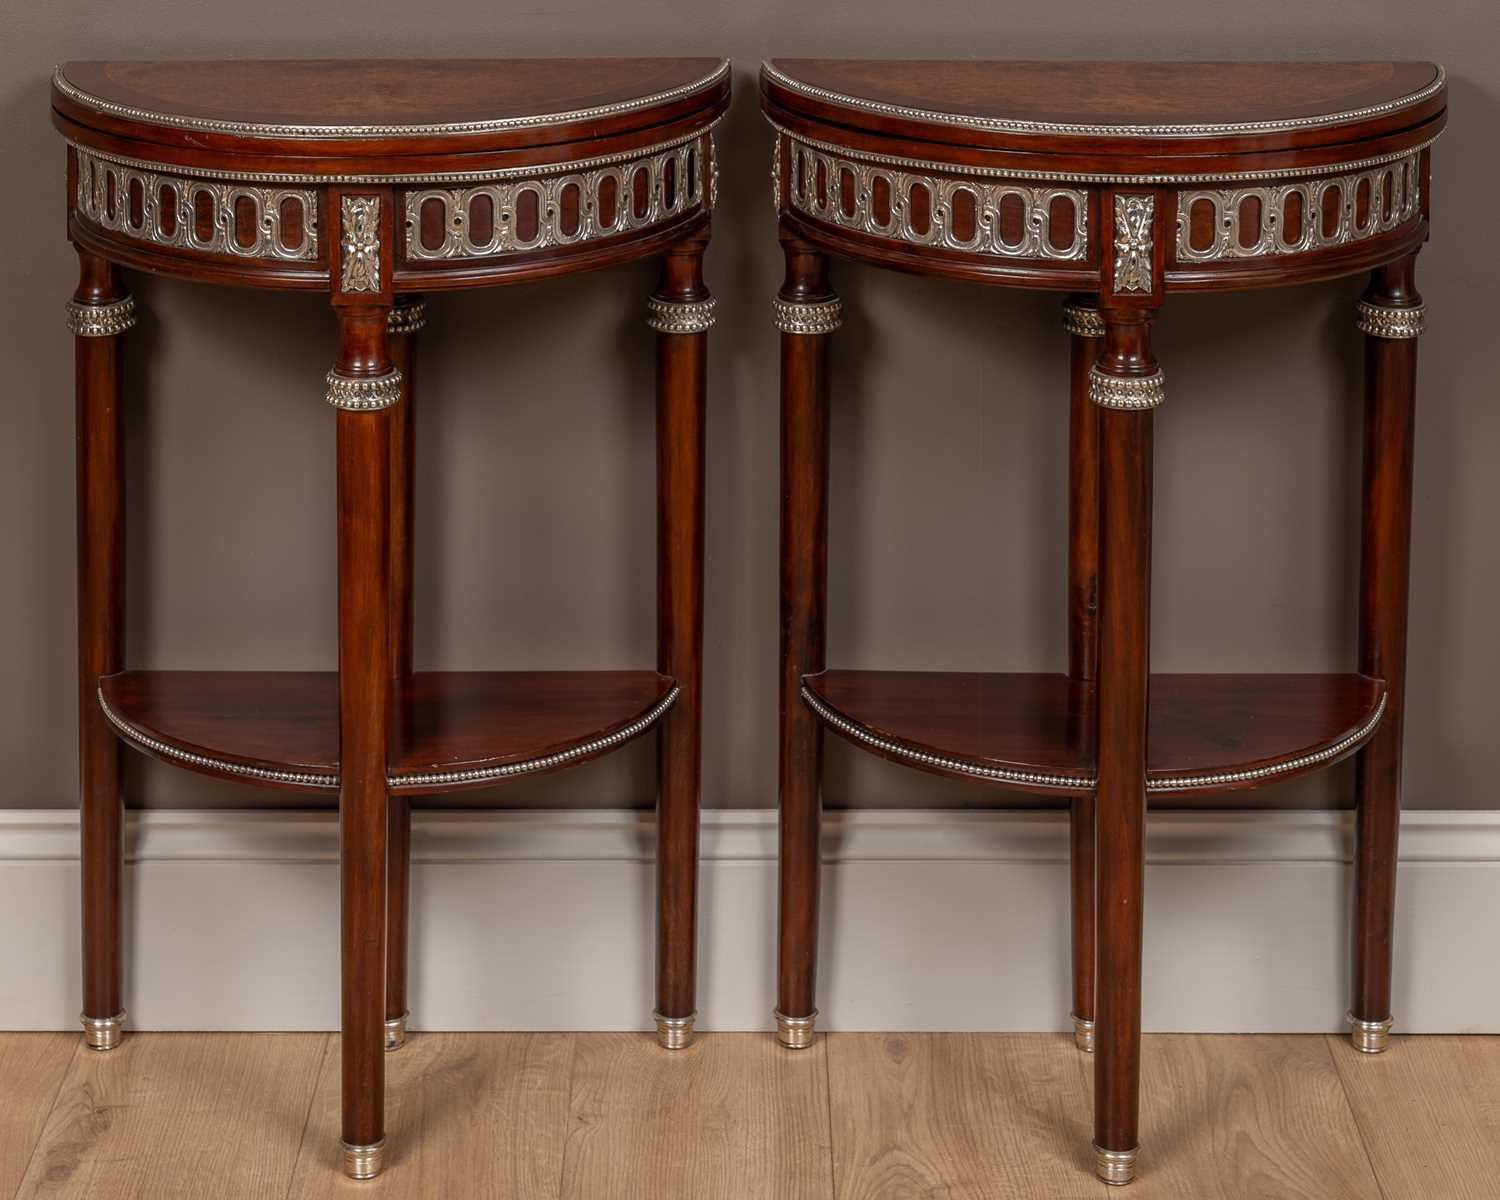 Lot 54 - A pair of 19th century French Empire style demi-lune fold-over side tables